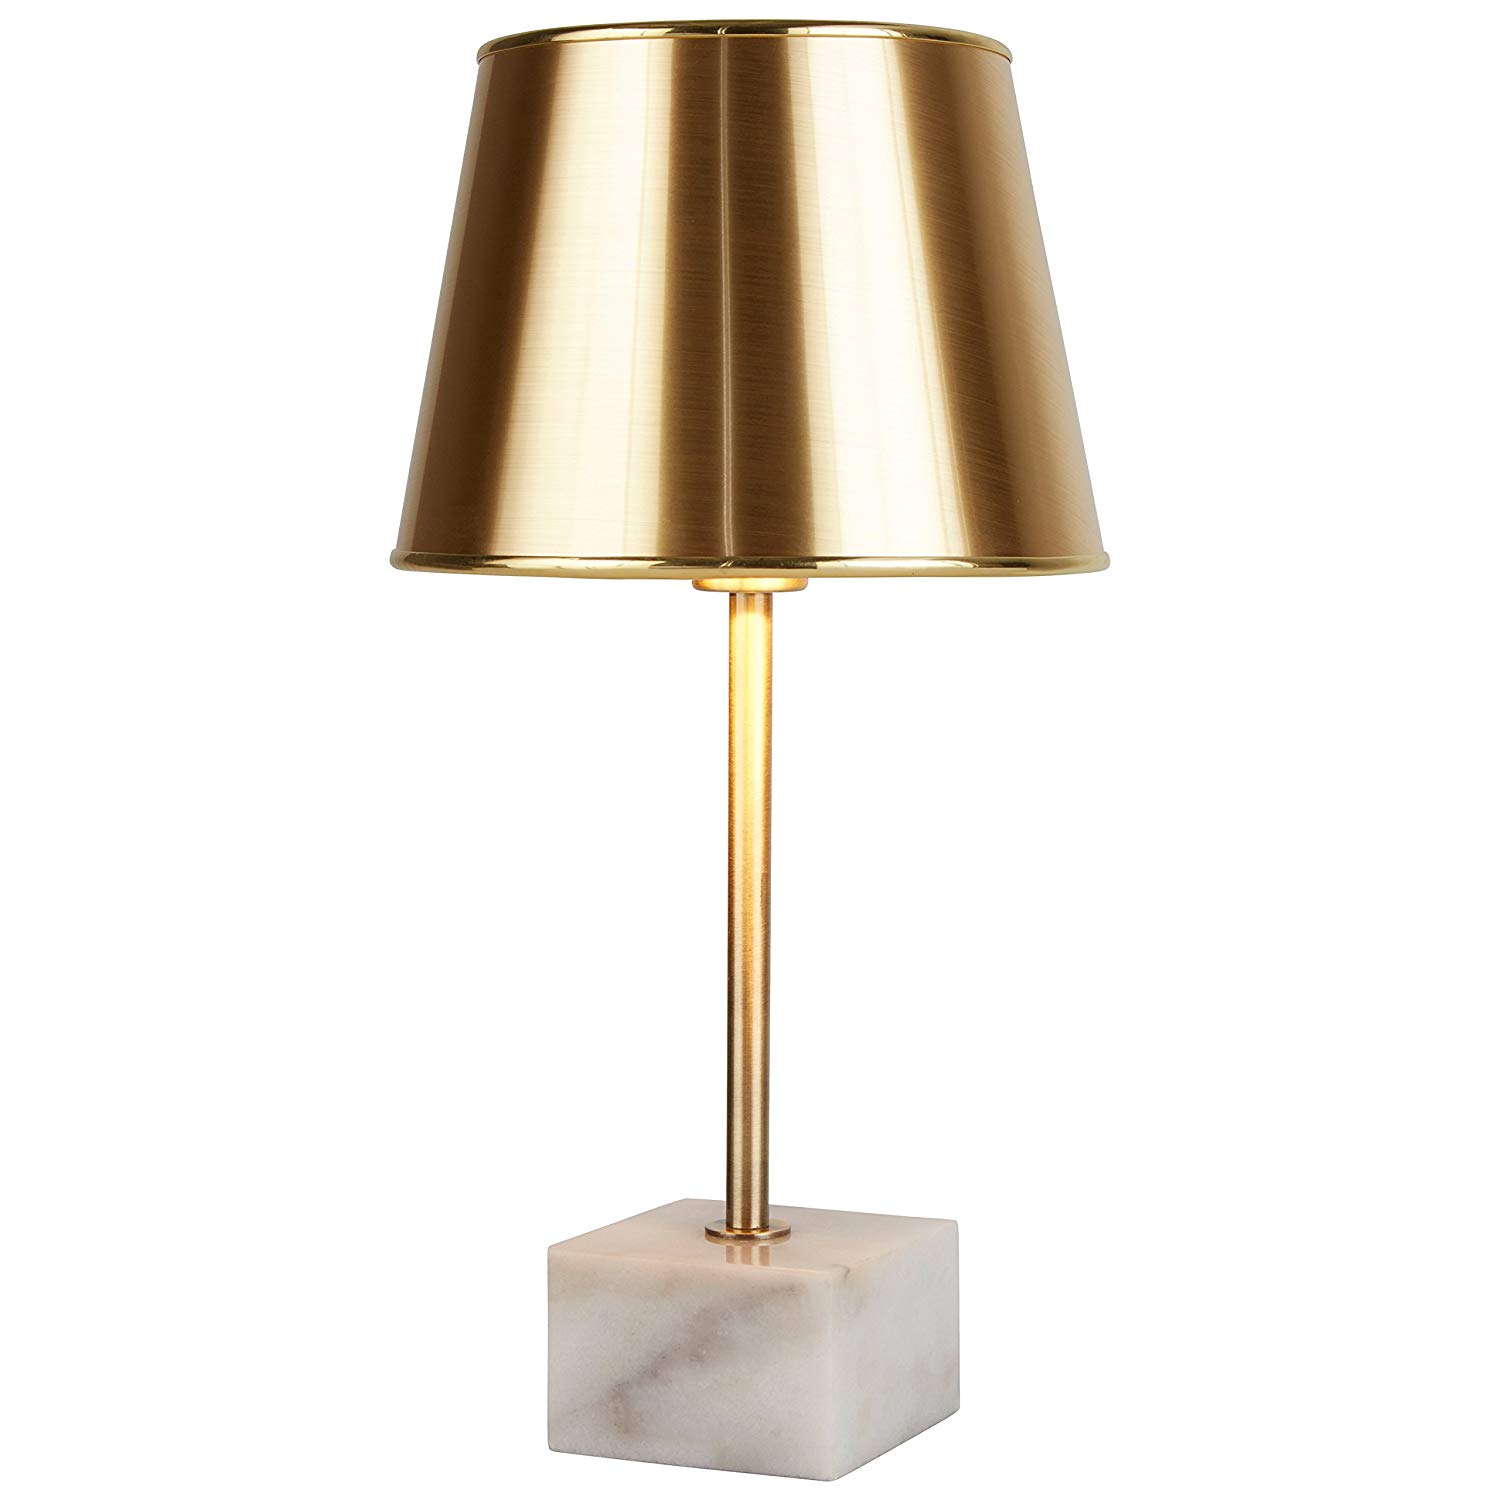 rivet marble and brass table lamp with bulb gold accent lamps farmhouse plans target metal headboard amish oak end tables battery wall clocks clearance outdoor chairs dining pier